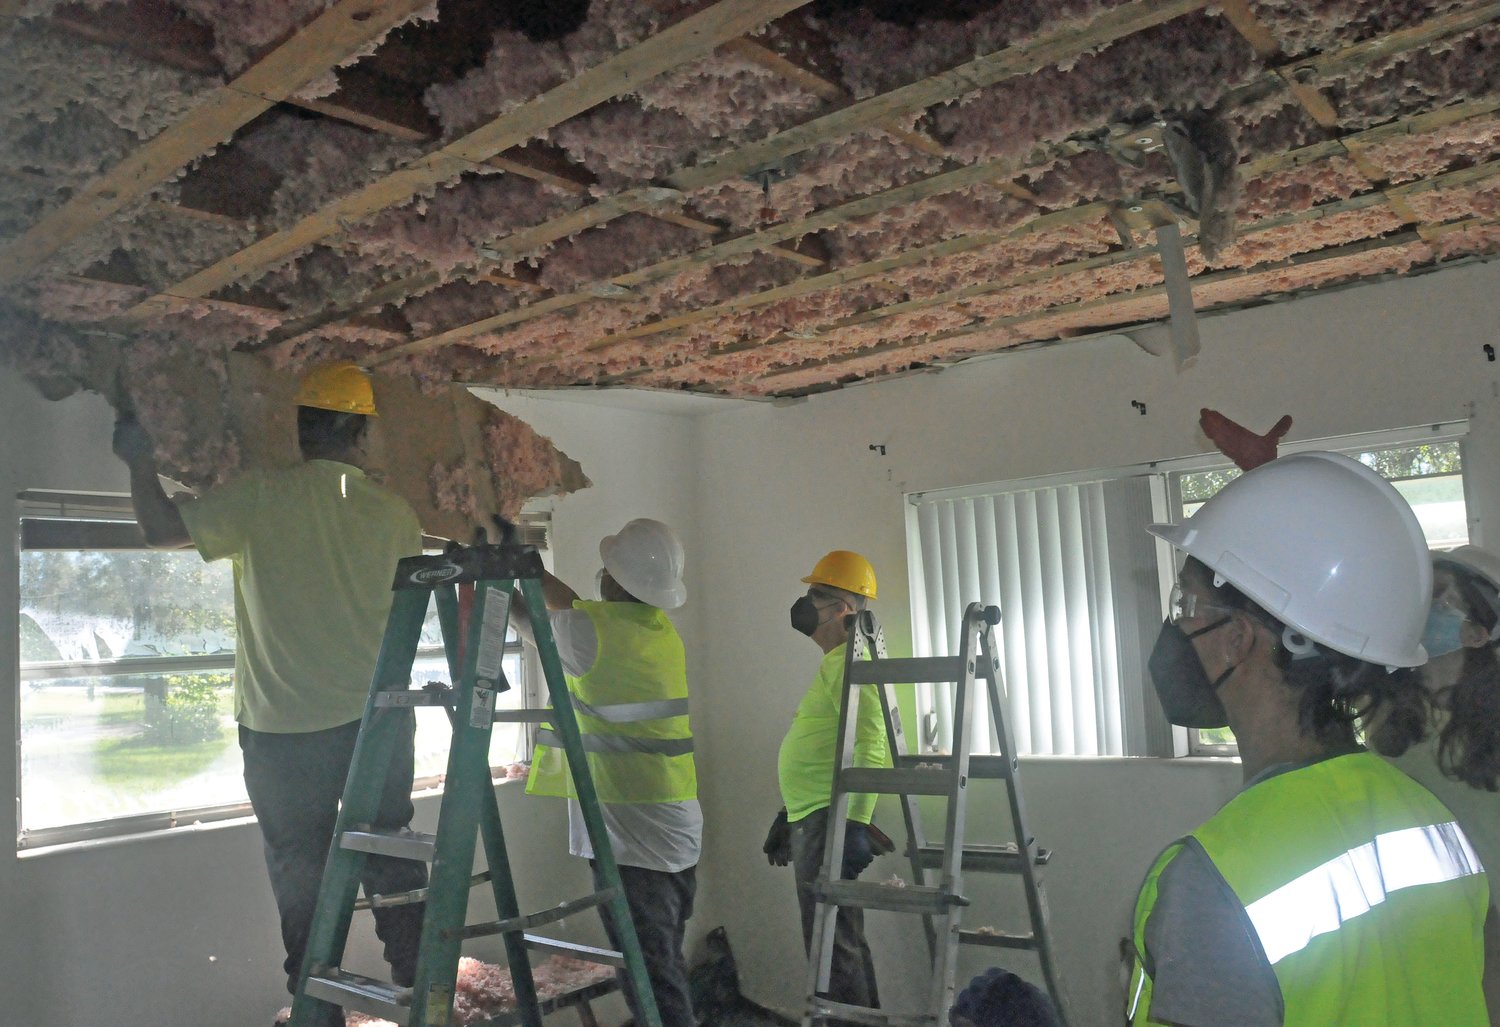 Insulation in the ceiling of the home of Richard and Janet Shuette had to be pulled down to allow it to dry after damage from Hurricane Ian.